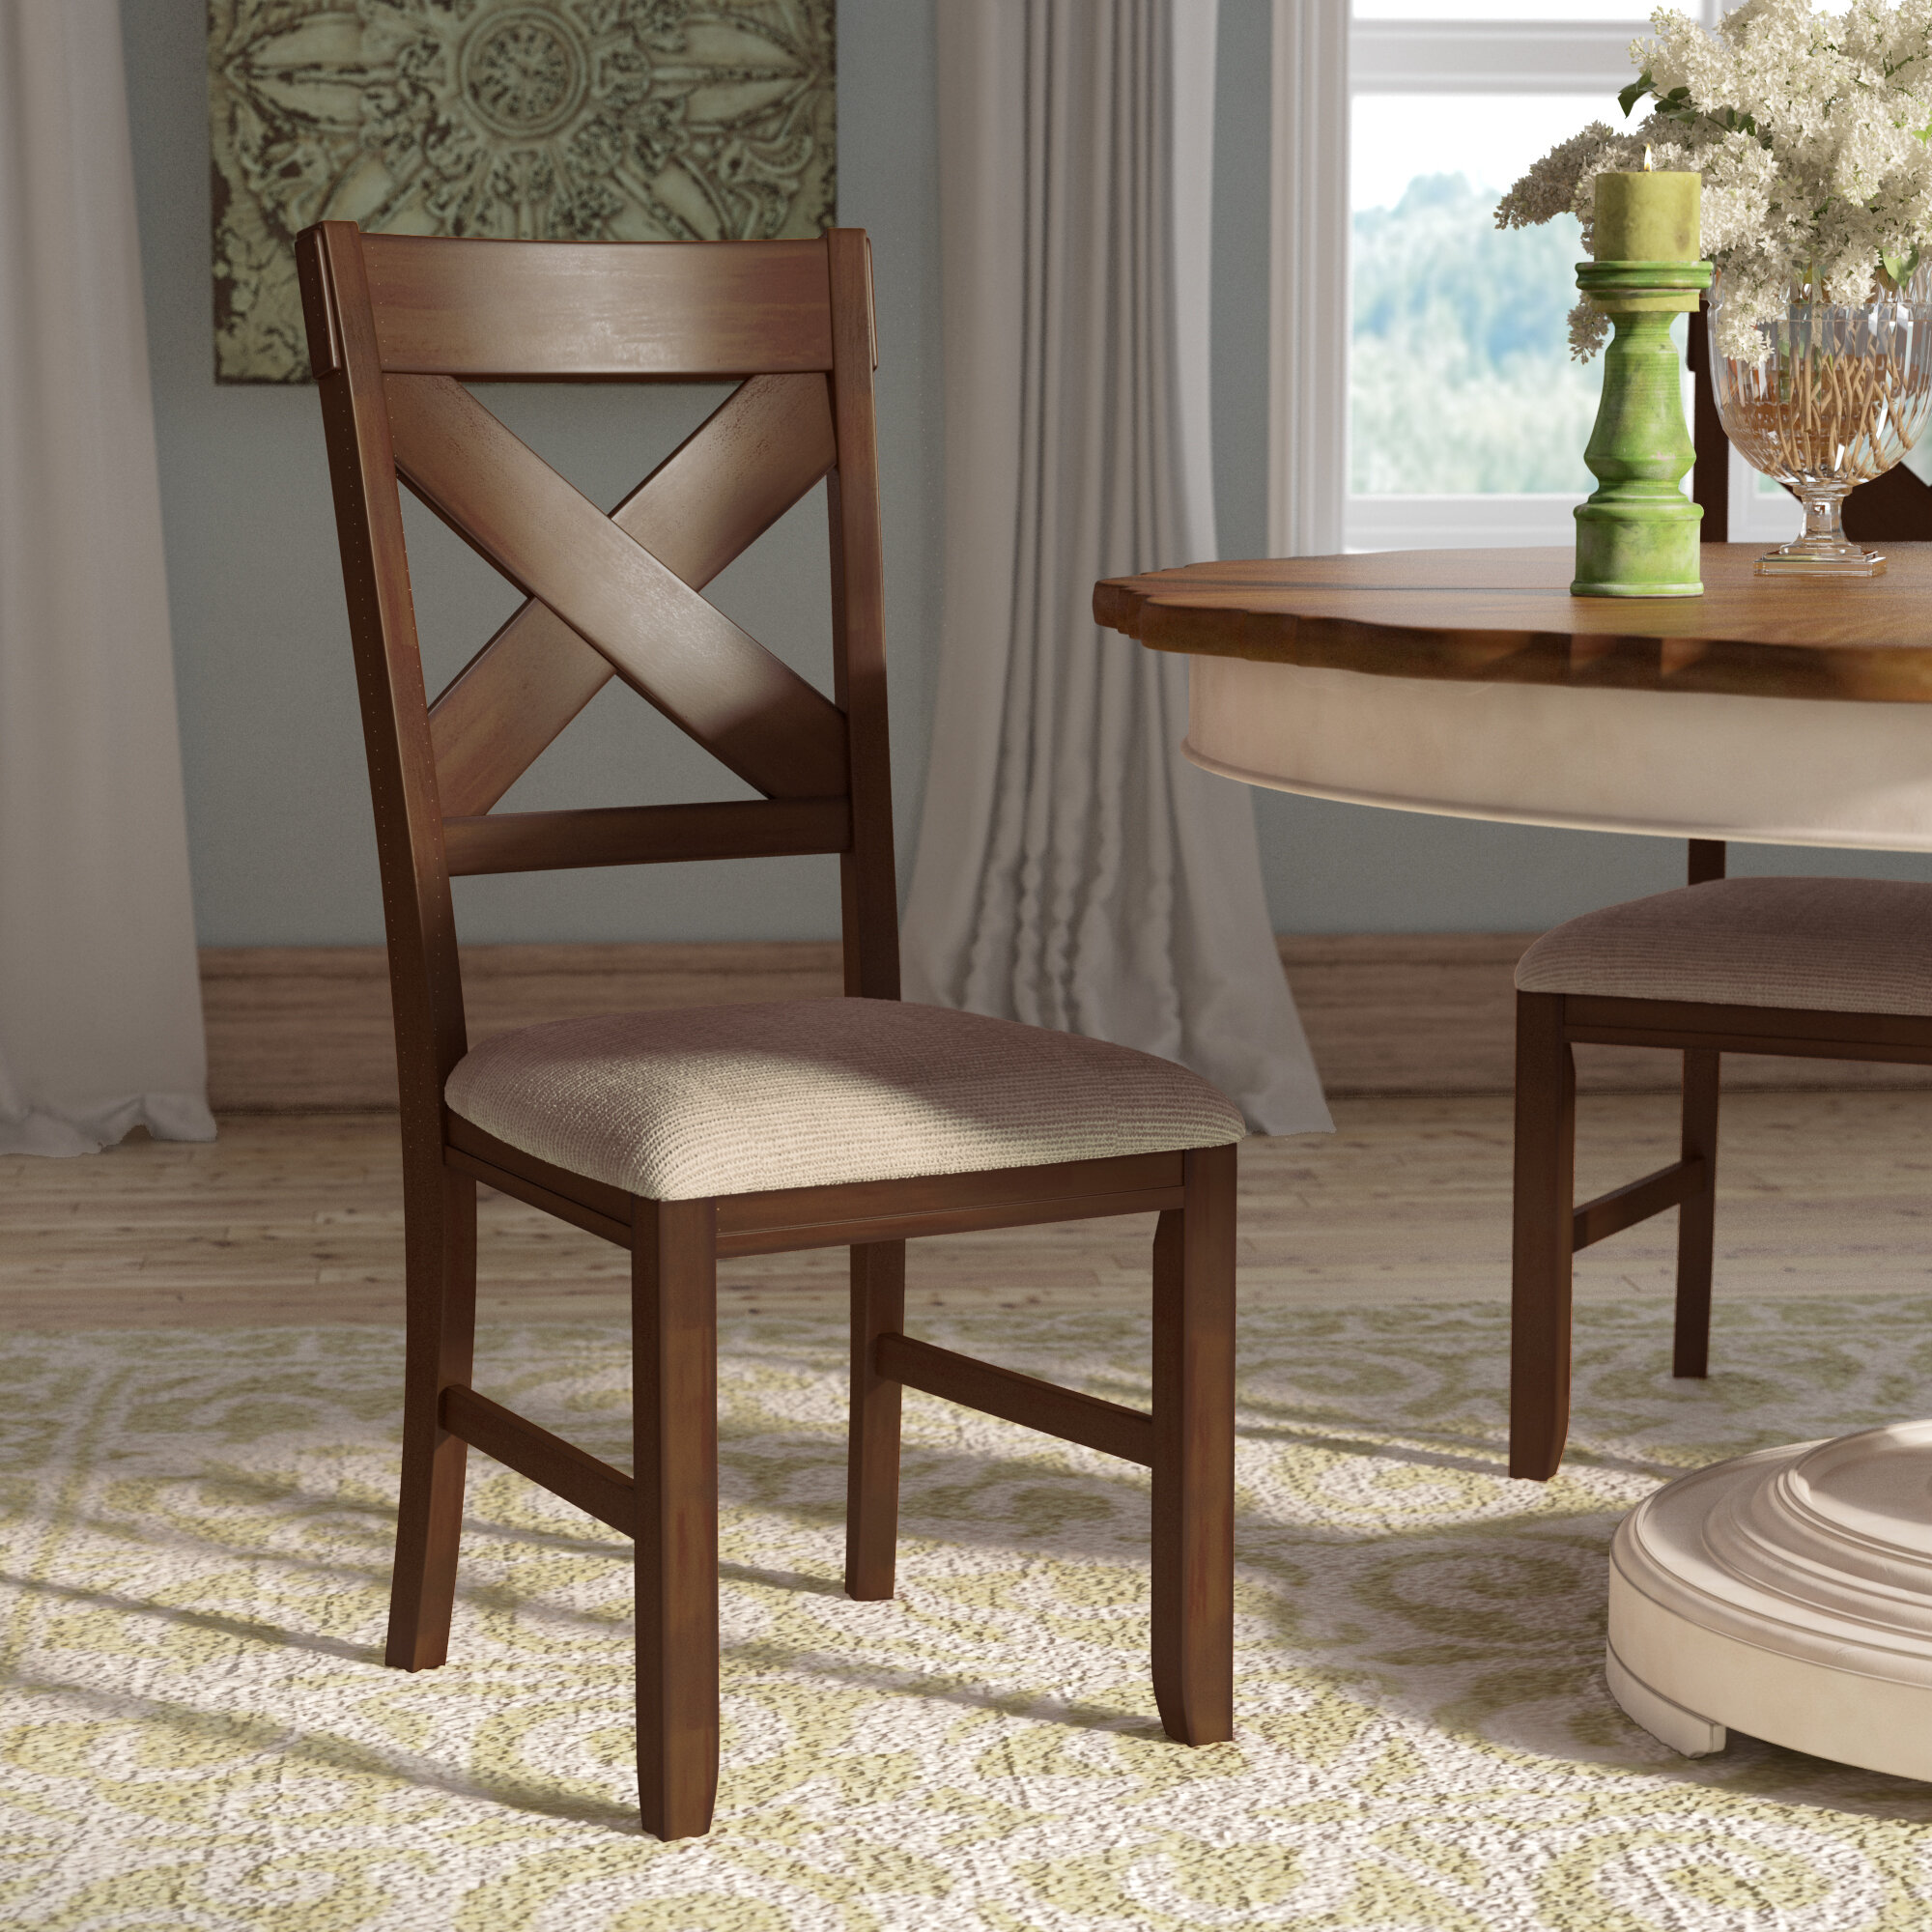 Farmhouse Upholstered Dining Room Chairs / Amazon Com Dining Room